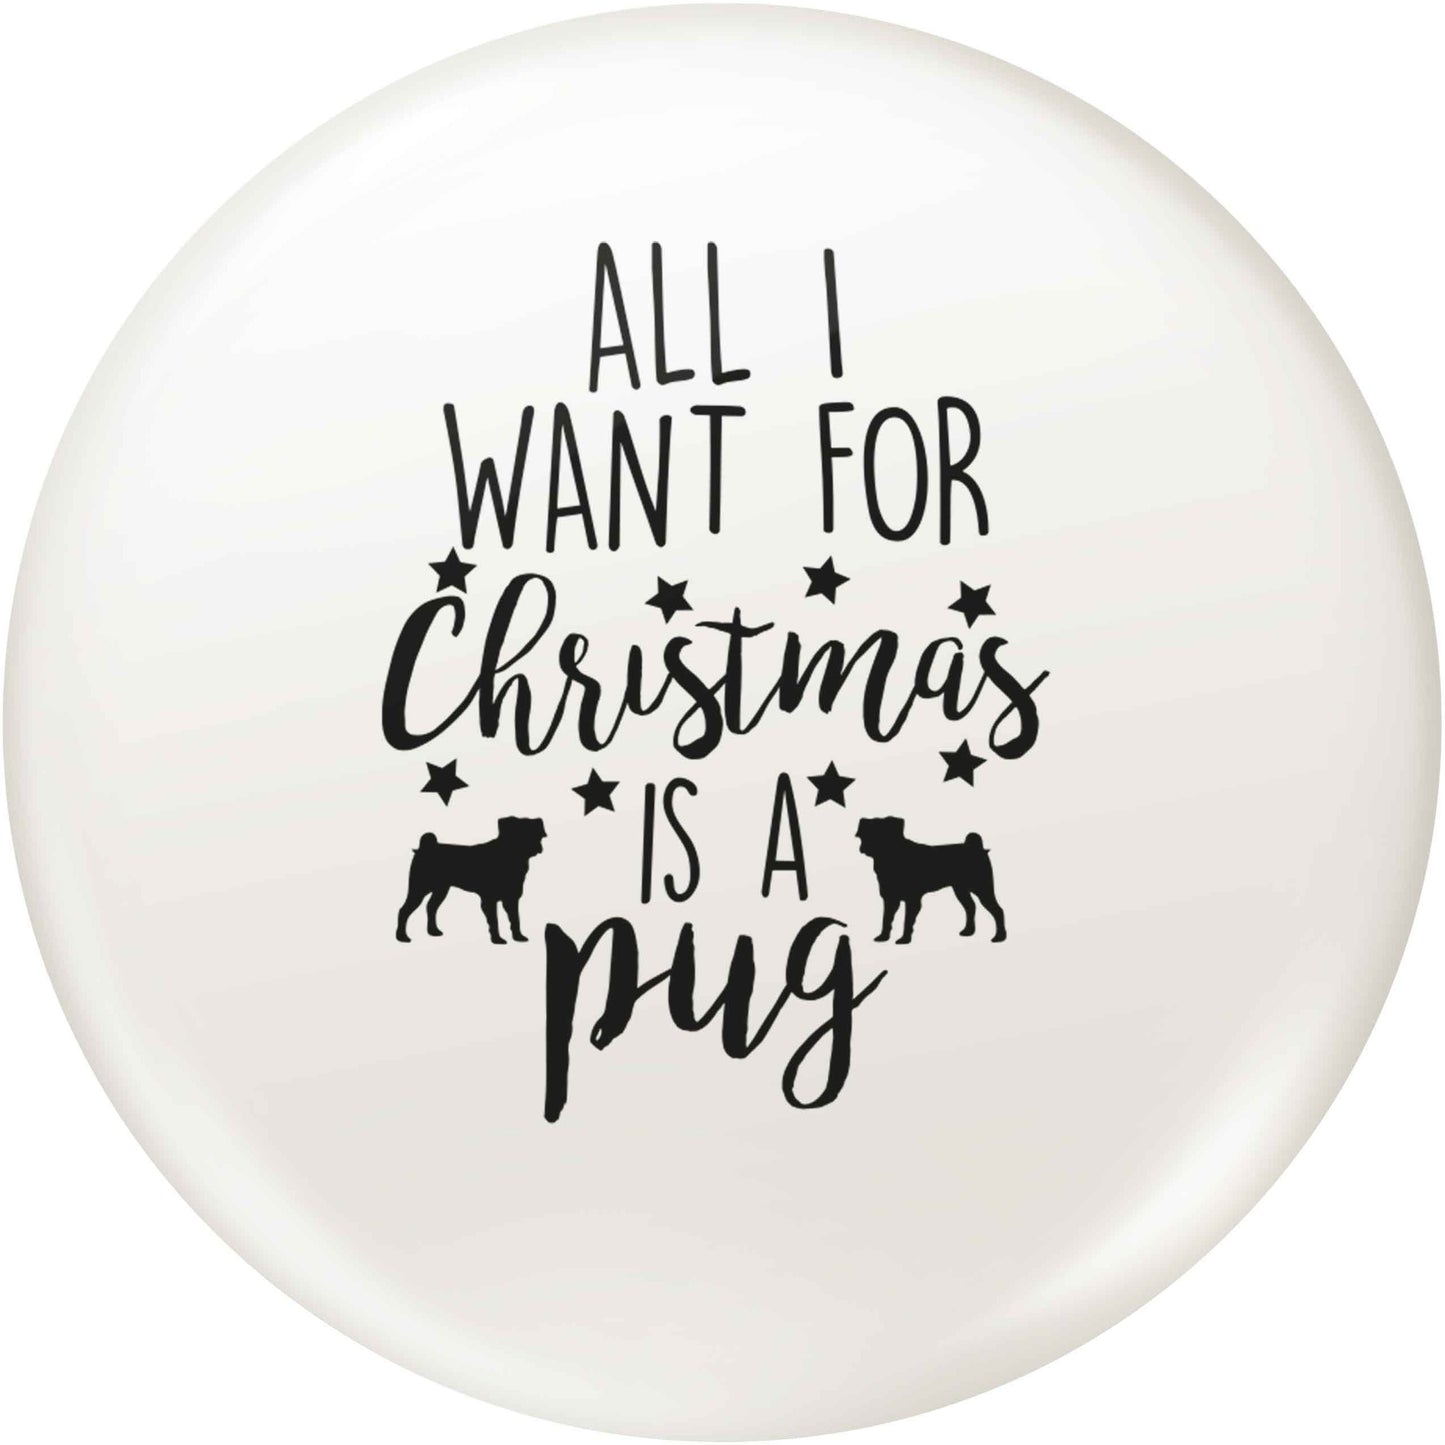 All I want for Christmas is a pug small 25mm Pin badge